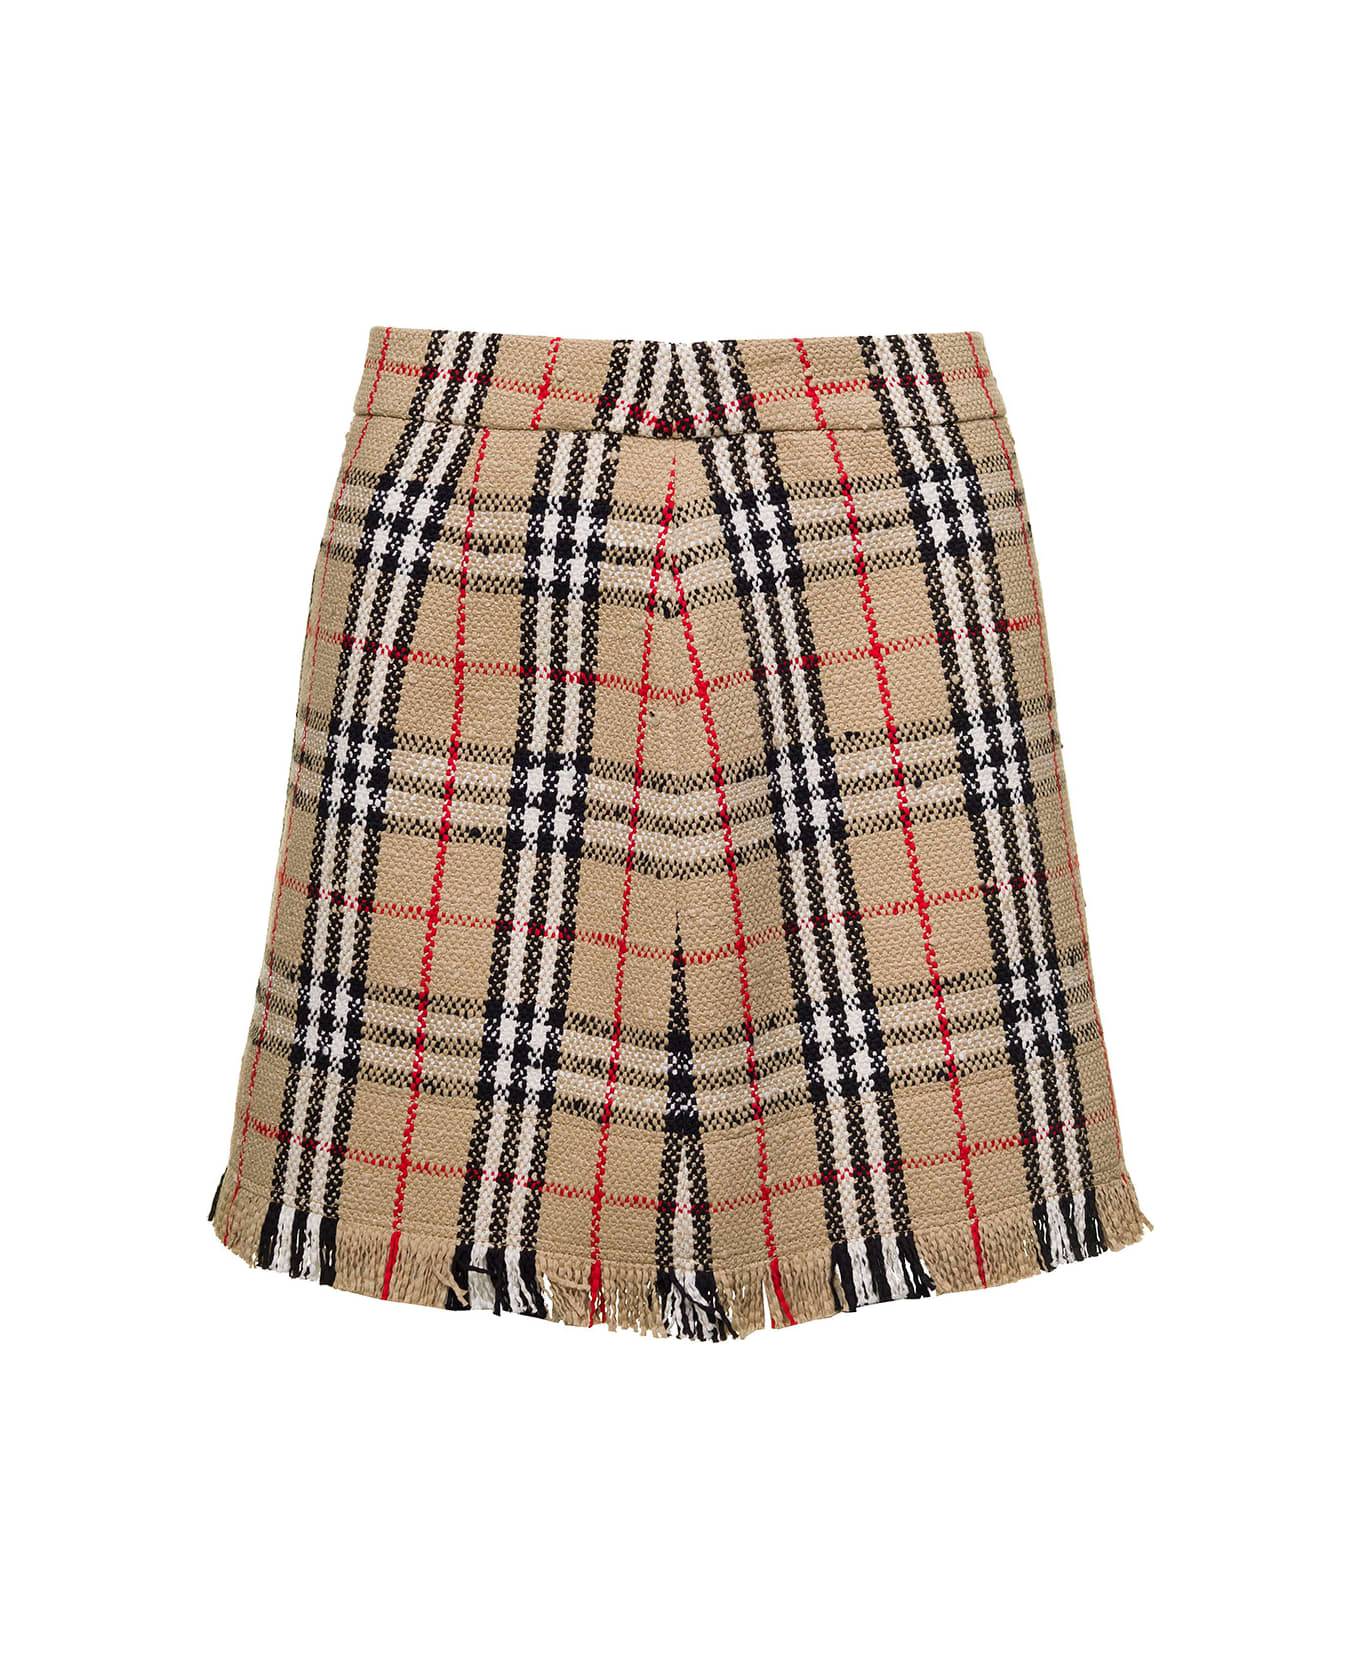 Burberry 'catia' Beige Mini Skirt With Fringed Hem And All-over Vintage Check Motif In Cotton Blend Woman - Beige